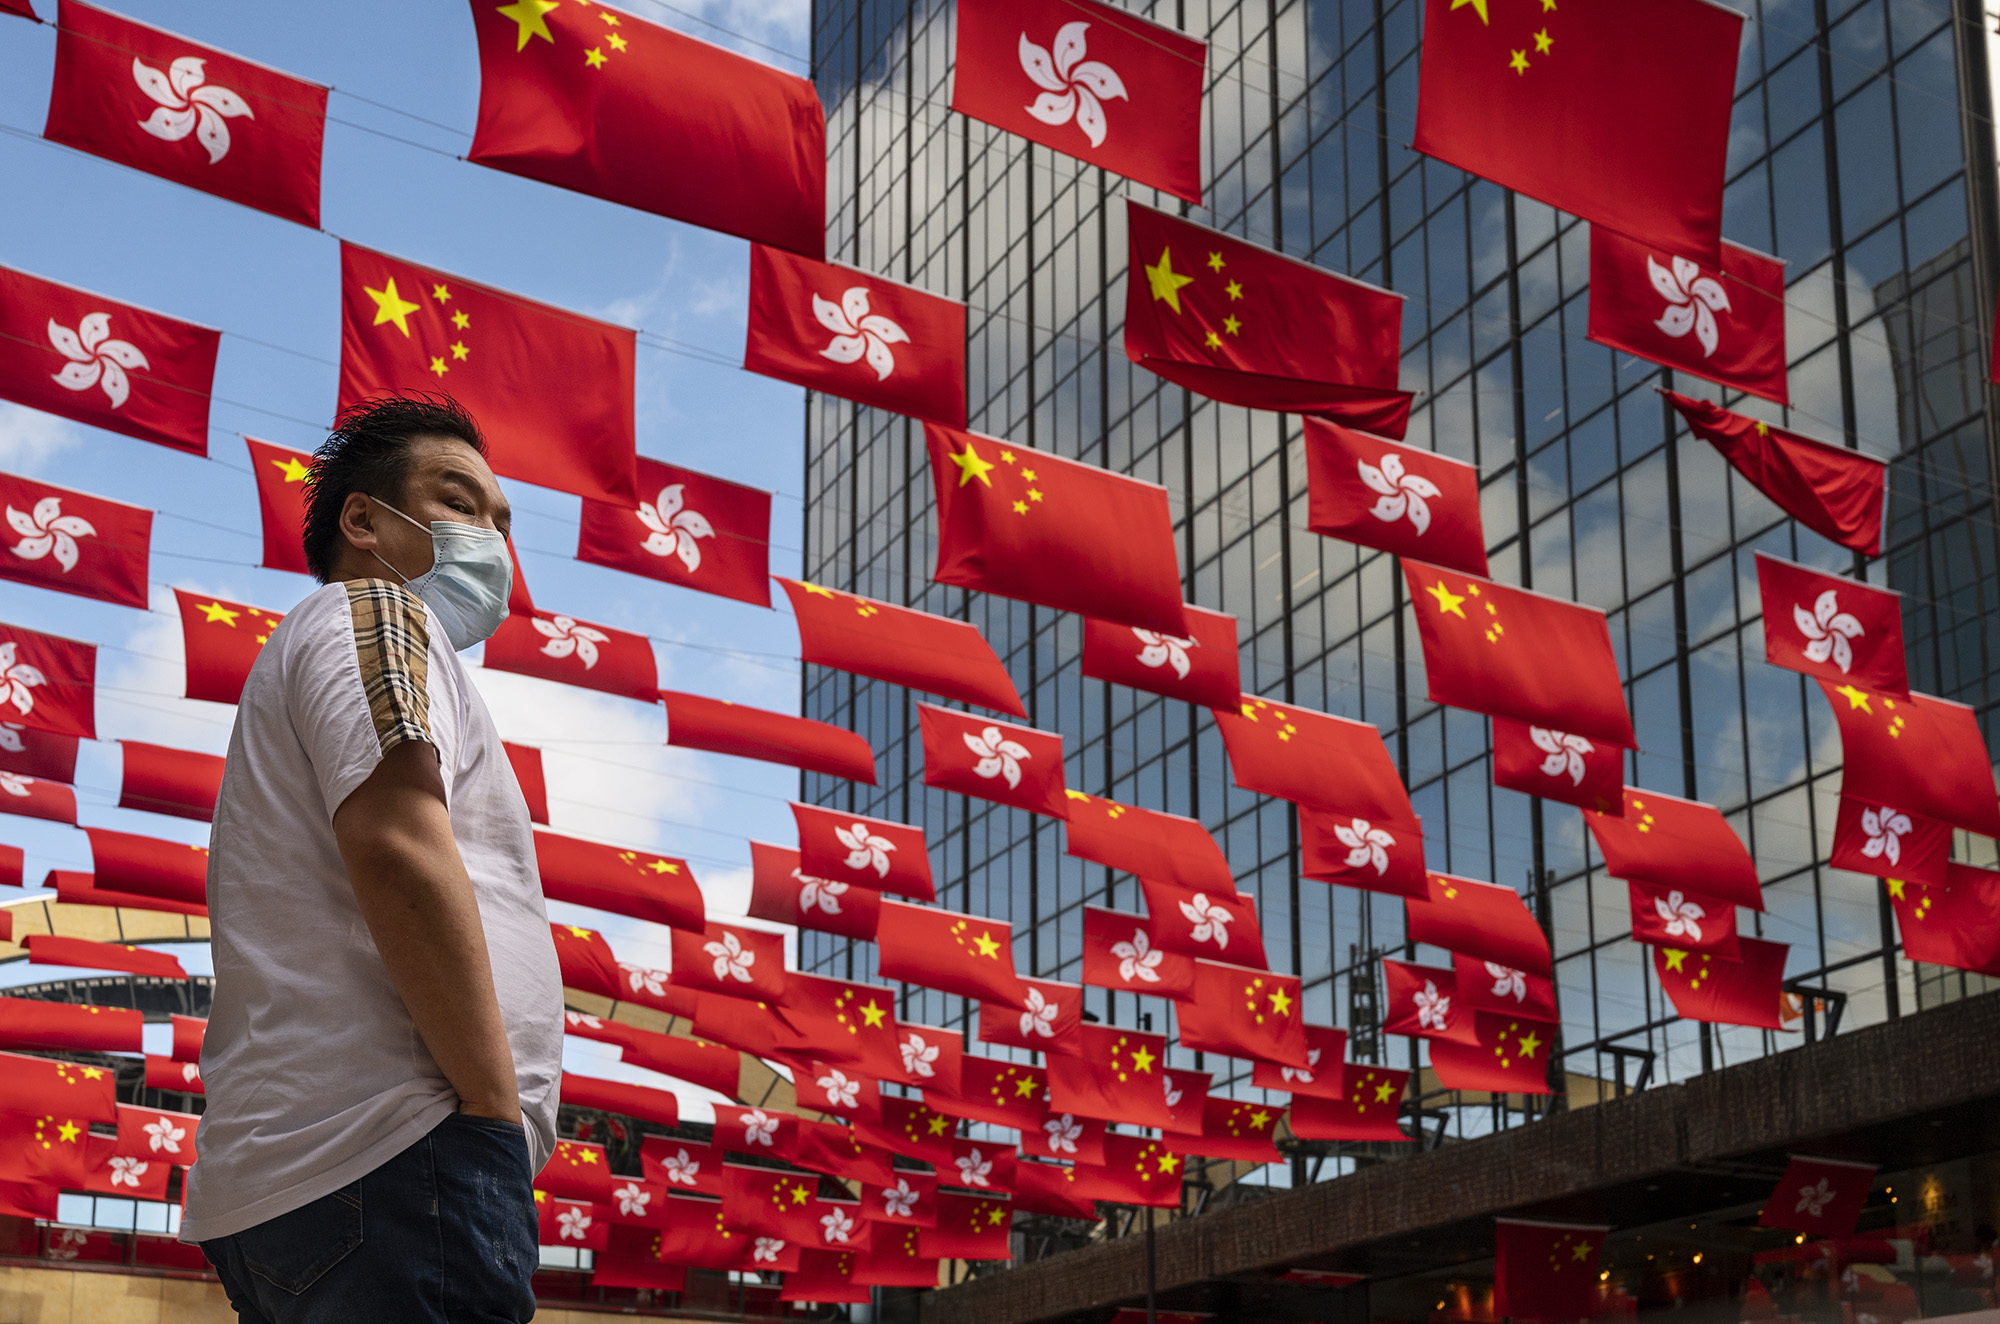 A pedestrian waits to cross the street as flags of China and Hong Kong are displayed ahead of the July 1 anniversary in Hong Kong on June 27. 